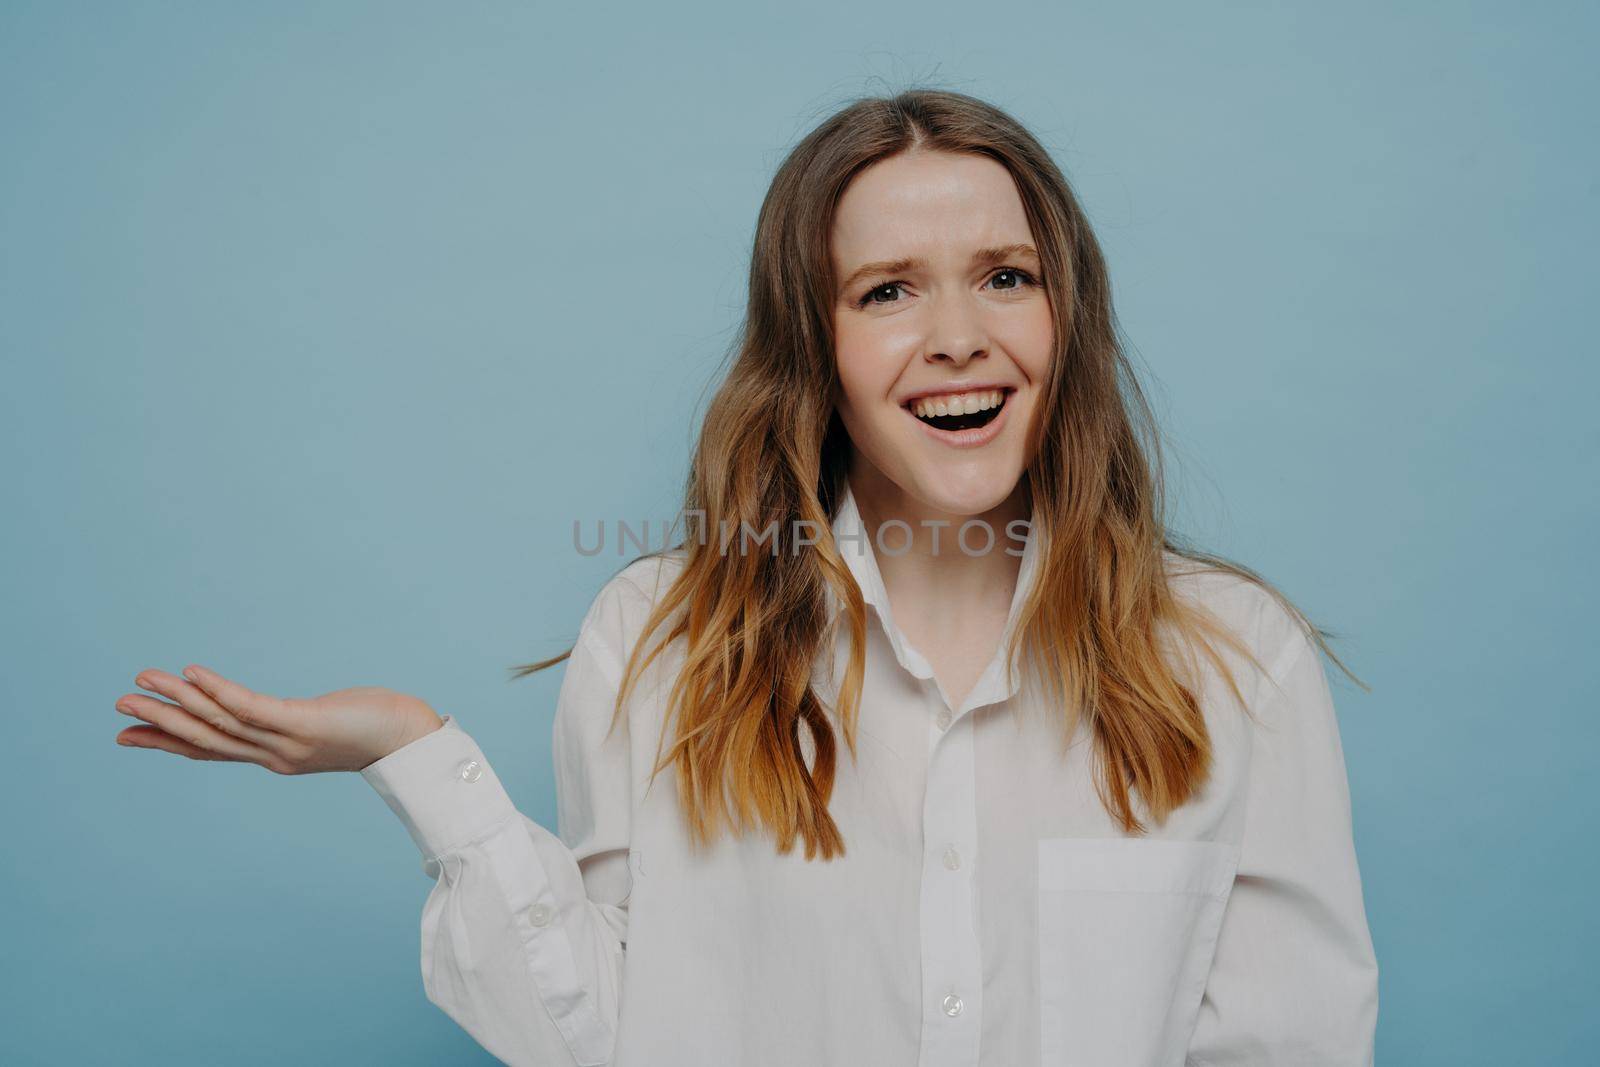 Positive happy female teenager in white shirt presenting something on hand, keeping palm raised while demonstrating or advertising product, standing isolated over blue background